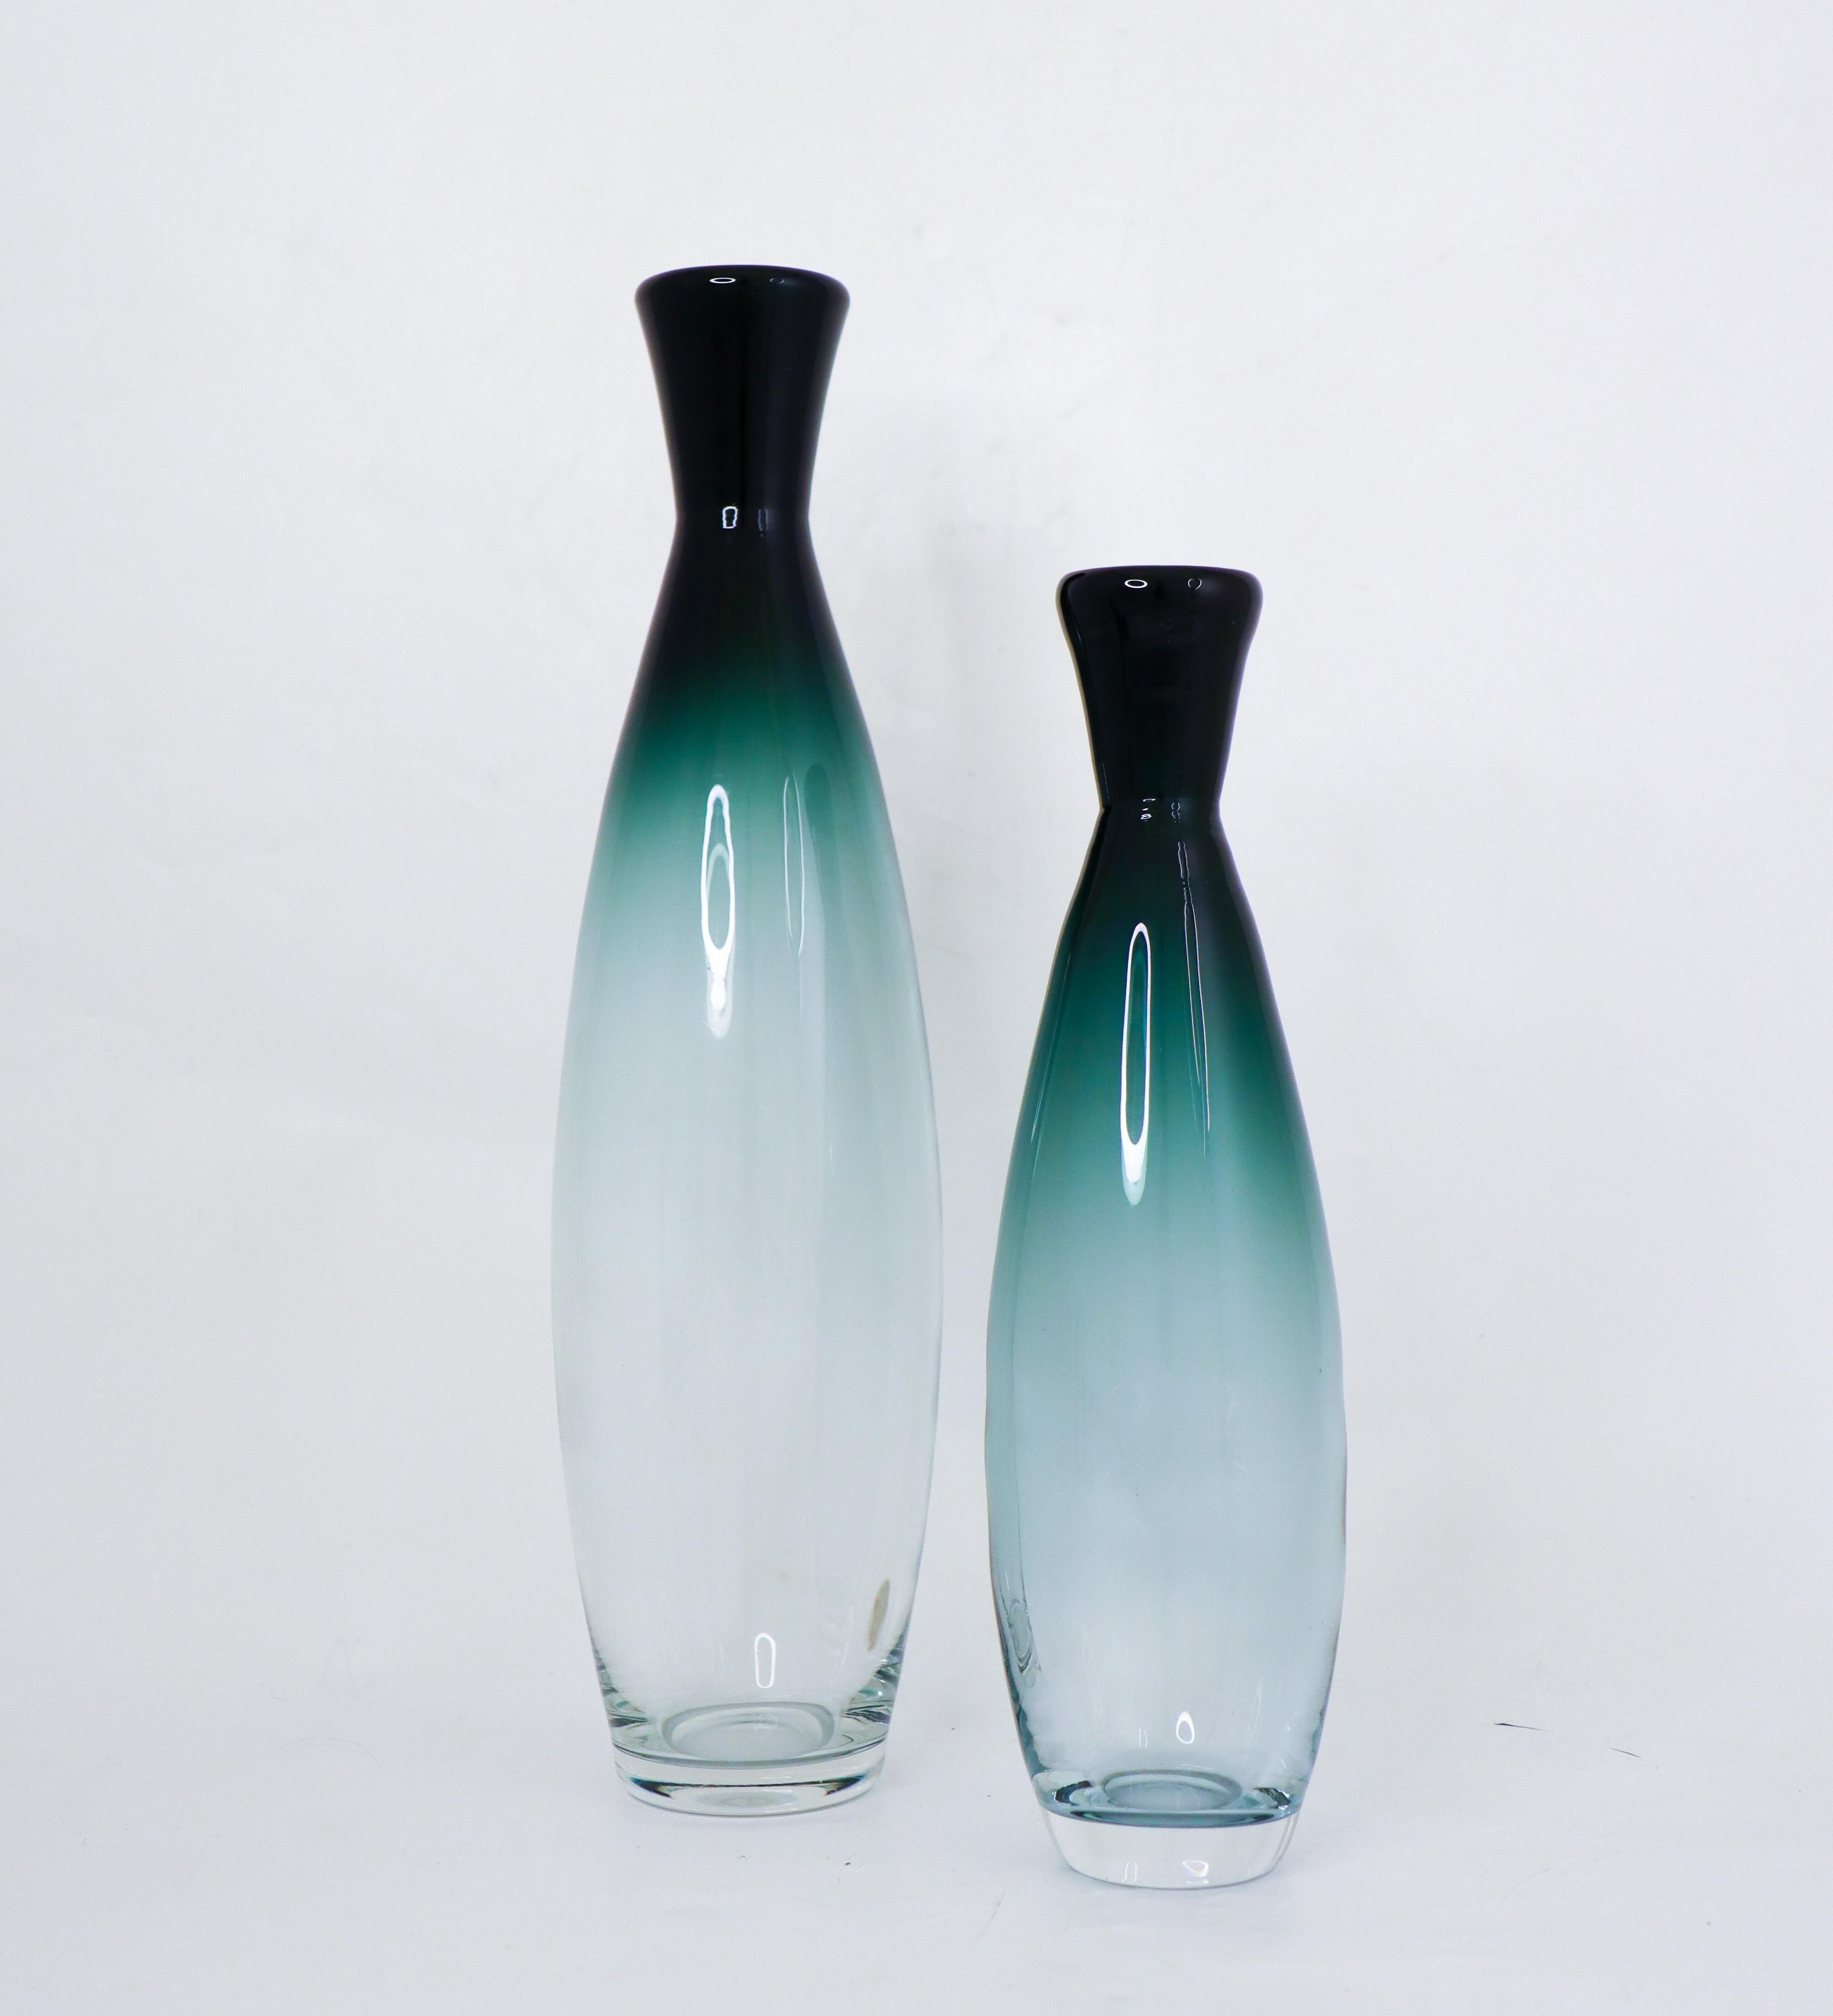 A pair of glass vases - Bengt Orup 